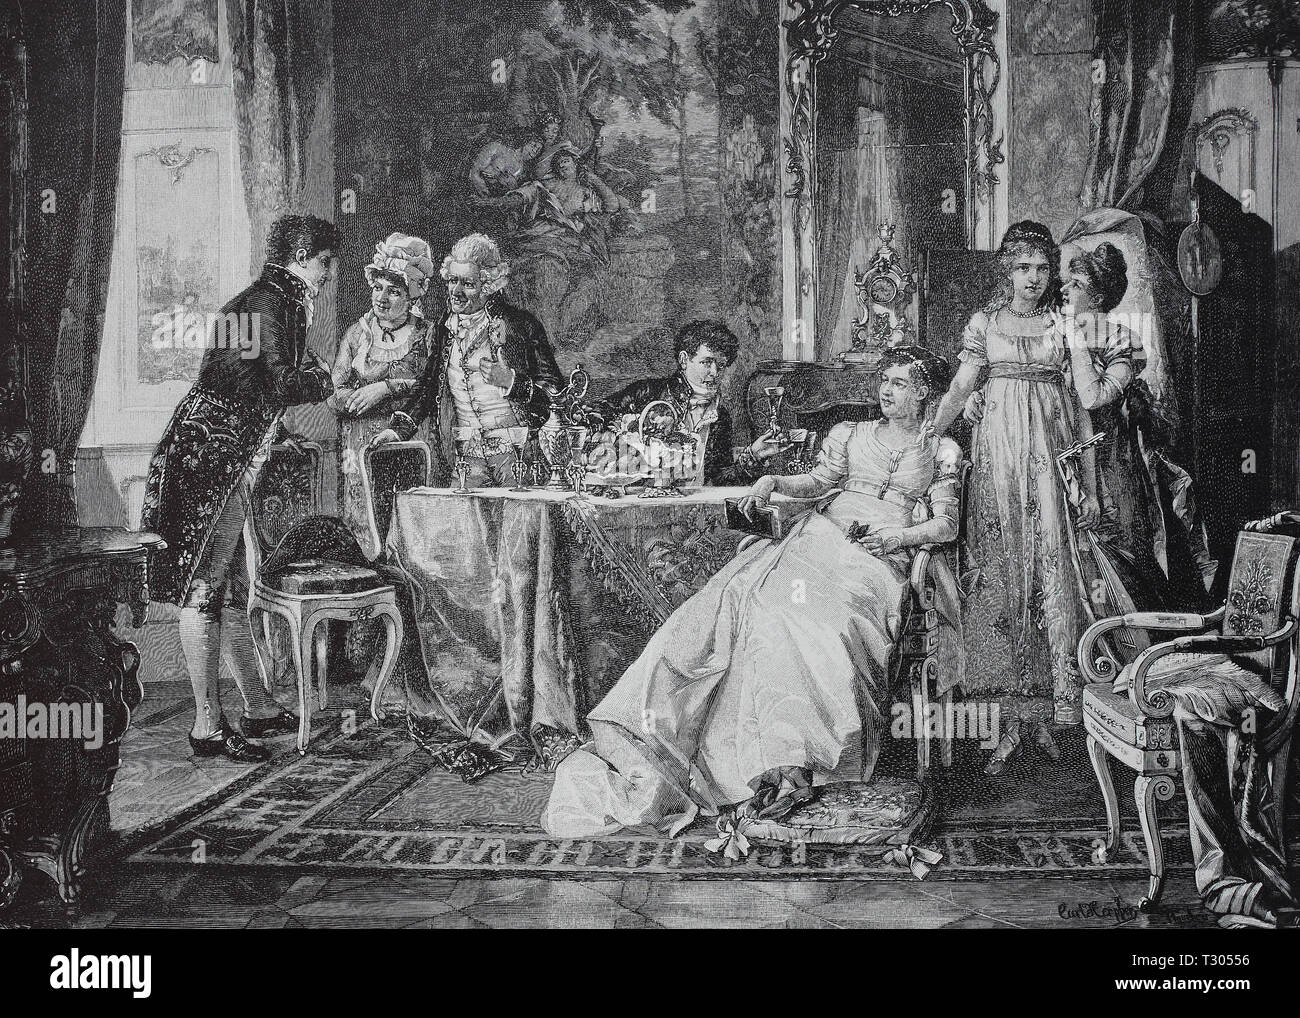 Digital improved reproduction, The suitor, the new bridegroom is introduced in the circle of the family, Der Freier, der neue Bräutigam wird in den Kreis der Familie eingeführt, from an original print from the 19th century Stock Photo